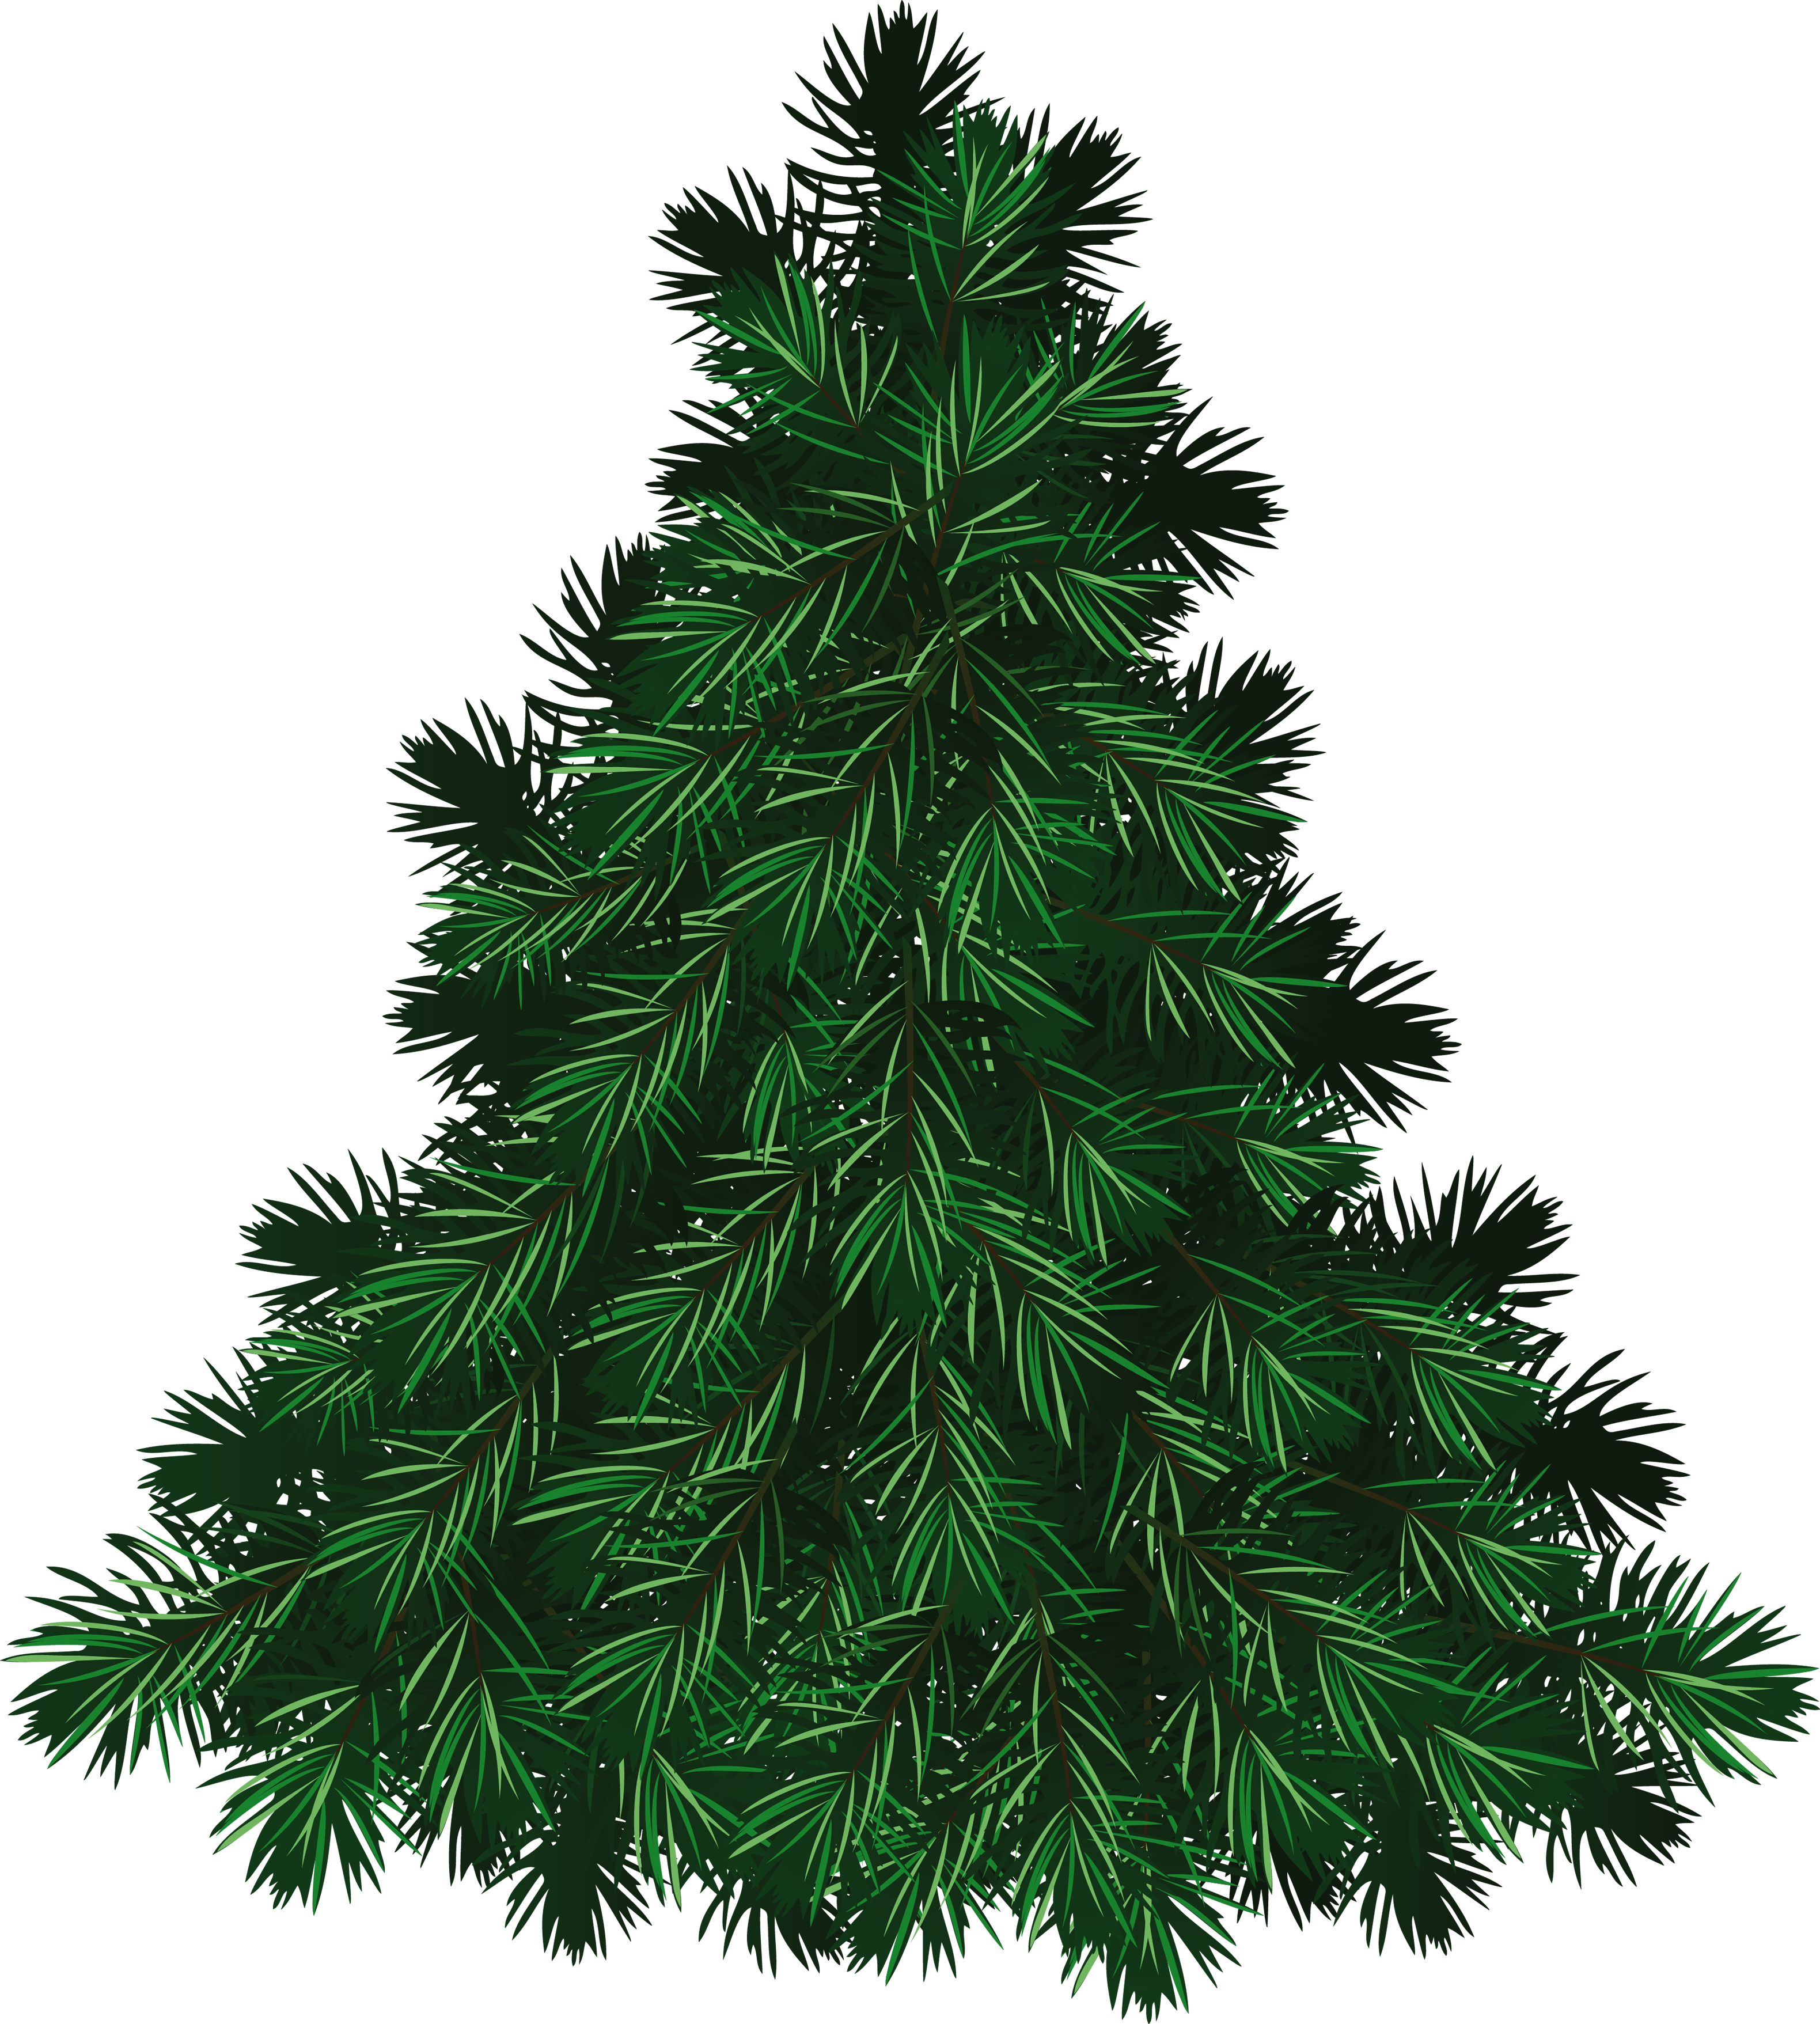 Green Fir Tree Png Image - Firtree, Transparent background PNG HD thumbnail